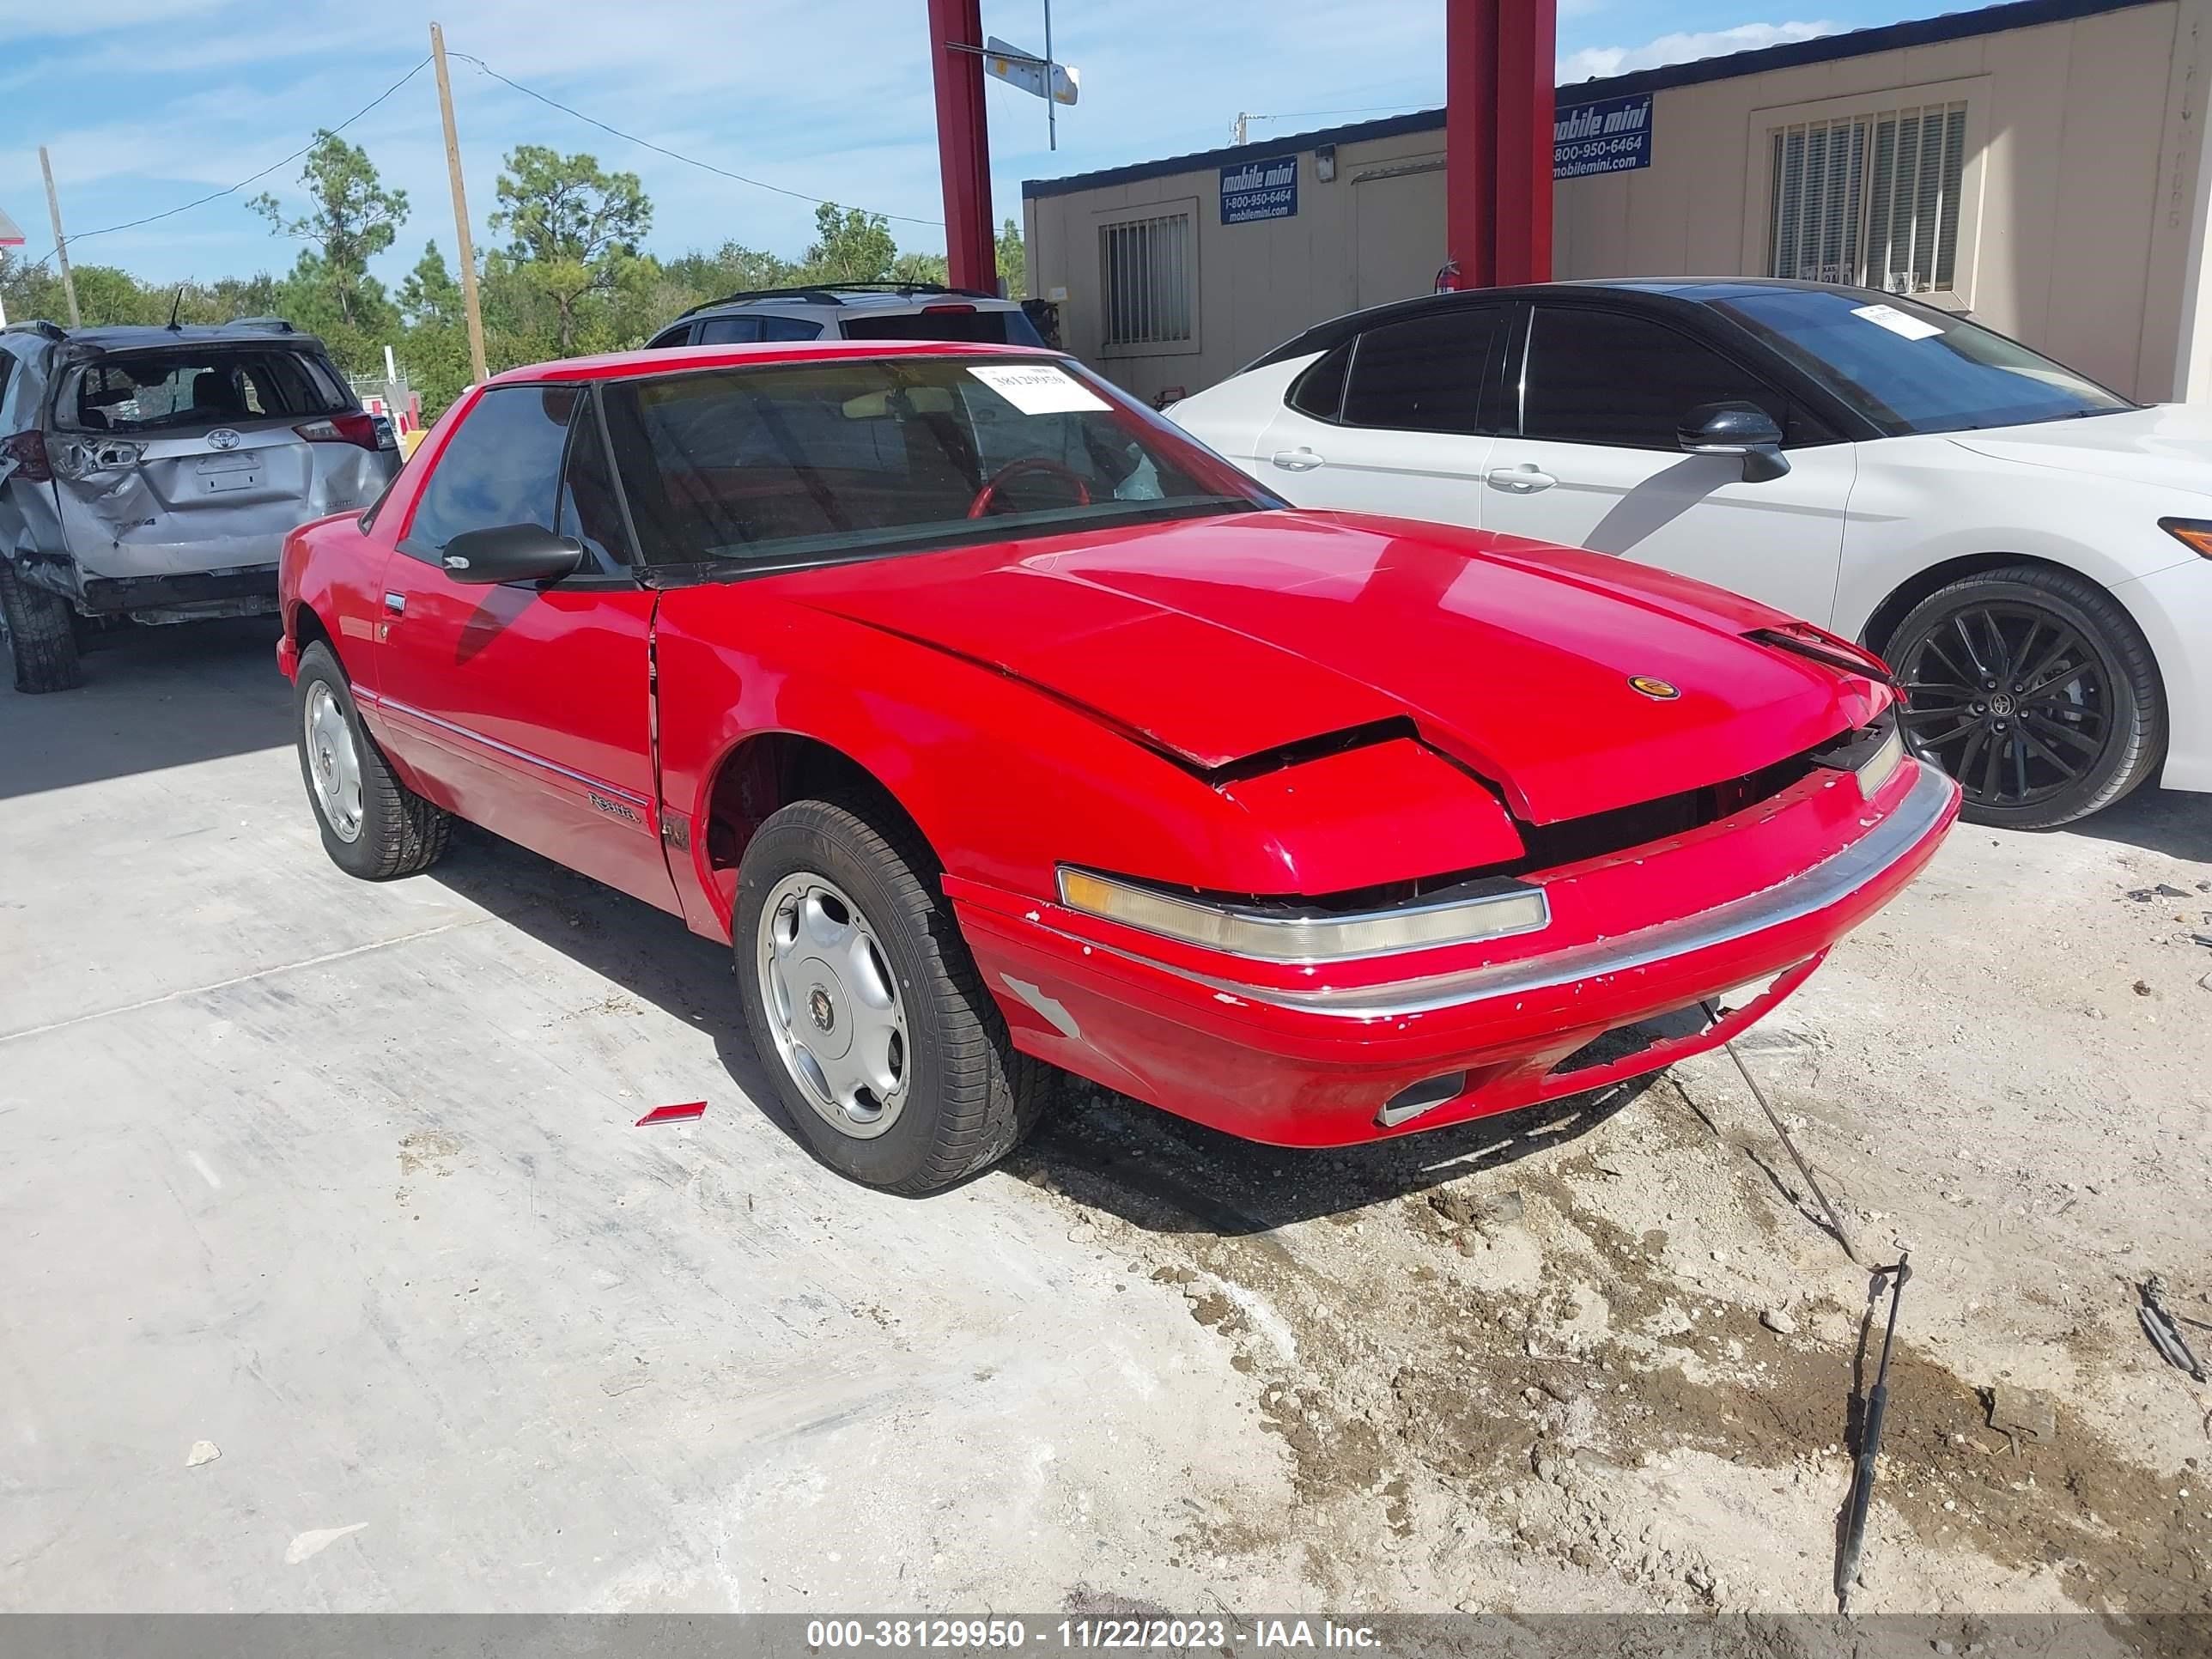 vin: 1G4EC13L2MB901465 1G4EC13L2MB901465 1991 buick reatta 3800 for Sale in 33913, 11950 Fl-82, Fort Myers, USA